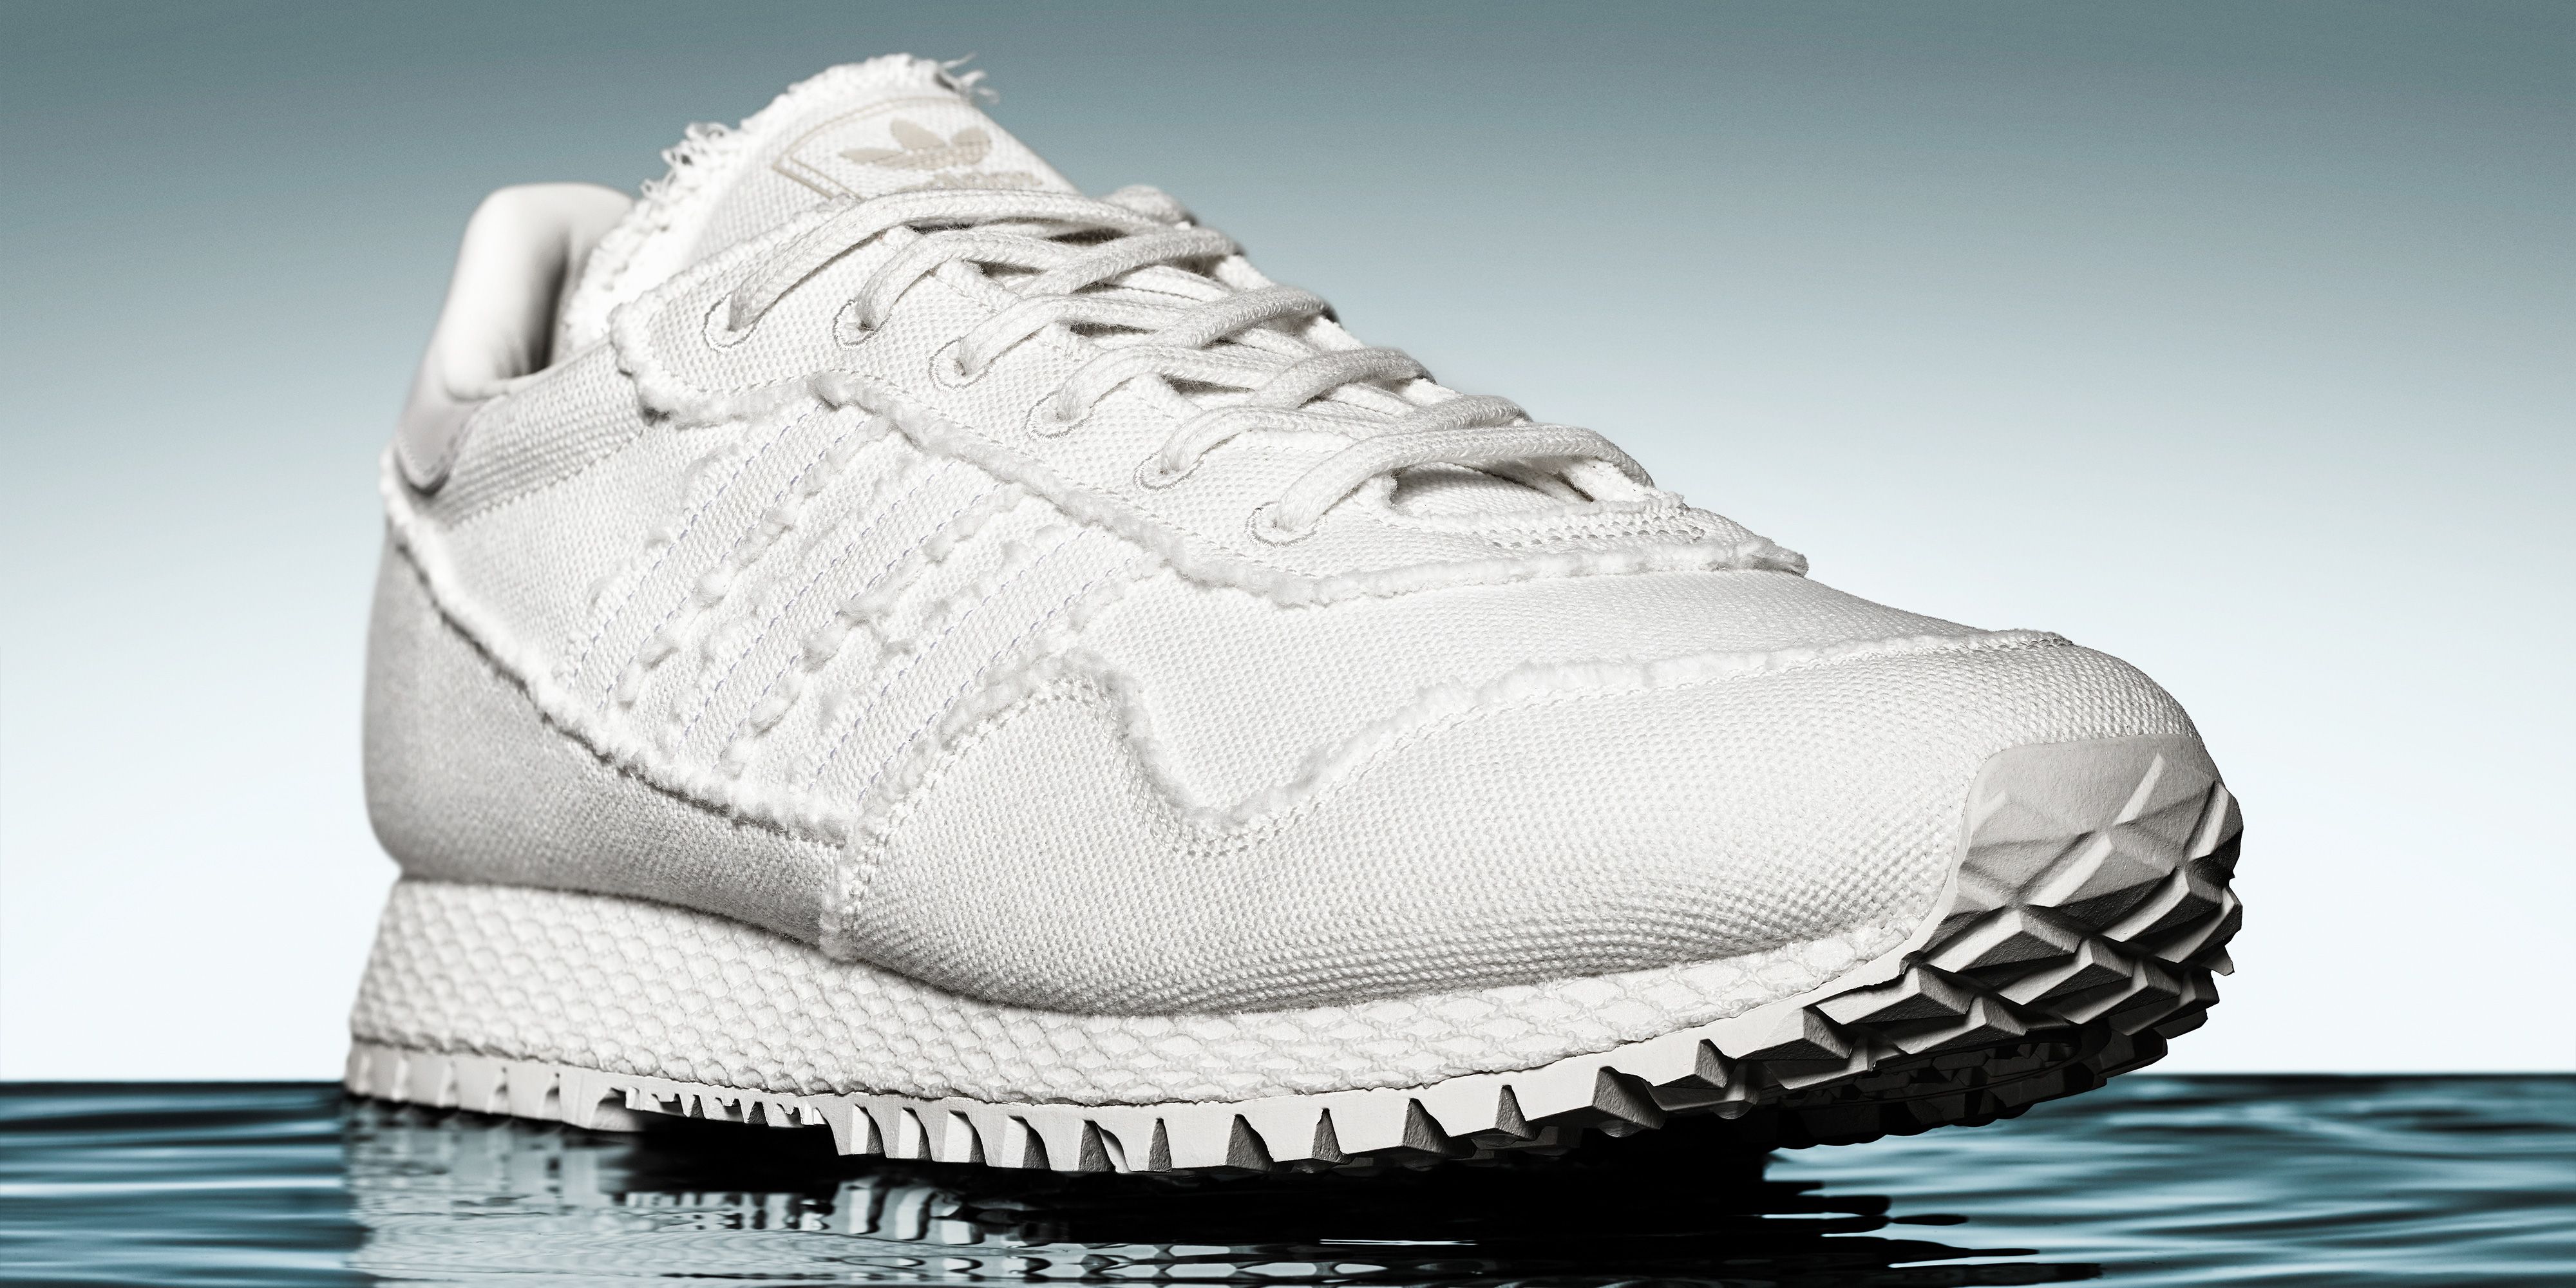 Adidas and Daniel Arsham's Seriously Cool New Sneakers Might Give You an Existential